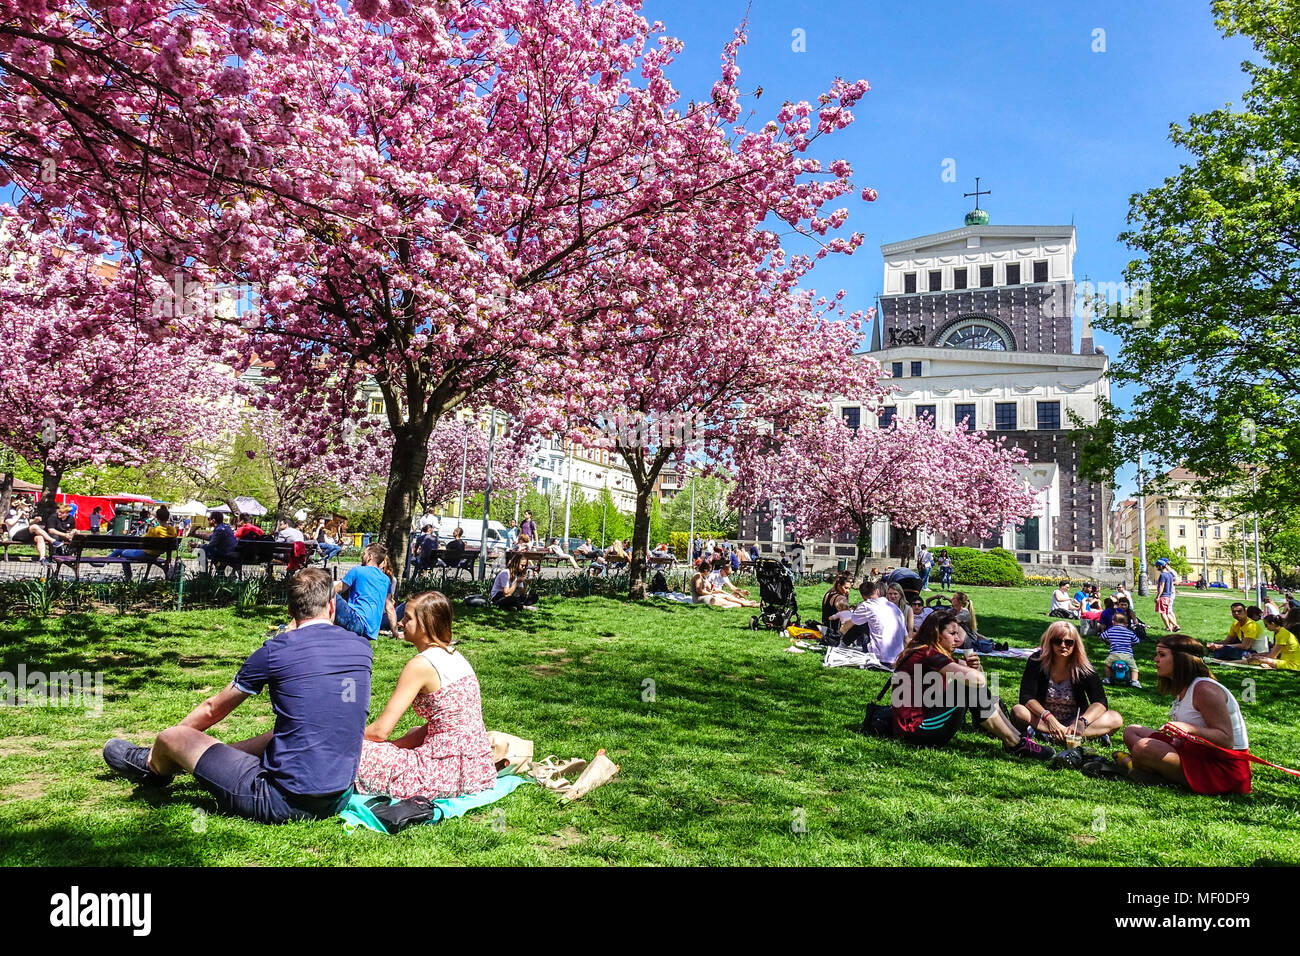 Prague Vinohrady Church of the Most Sacred Heart of Our Lord on Prague Jiriho z Podebrad Square Vinohrady, Prague park blooming cherry trees in spring Stock Photo